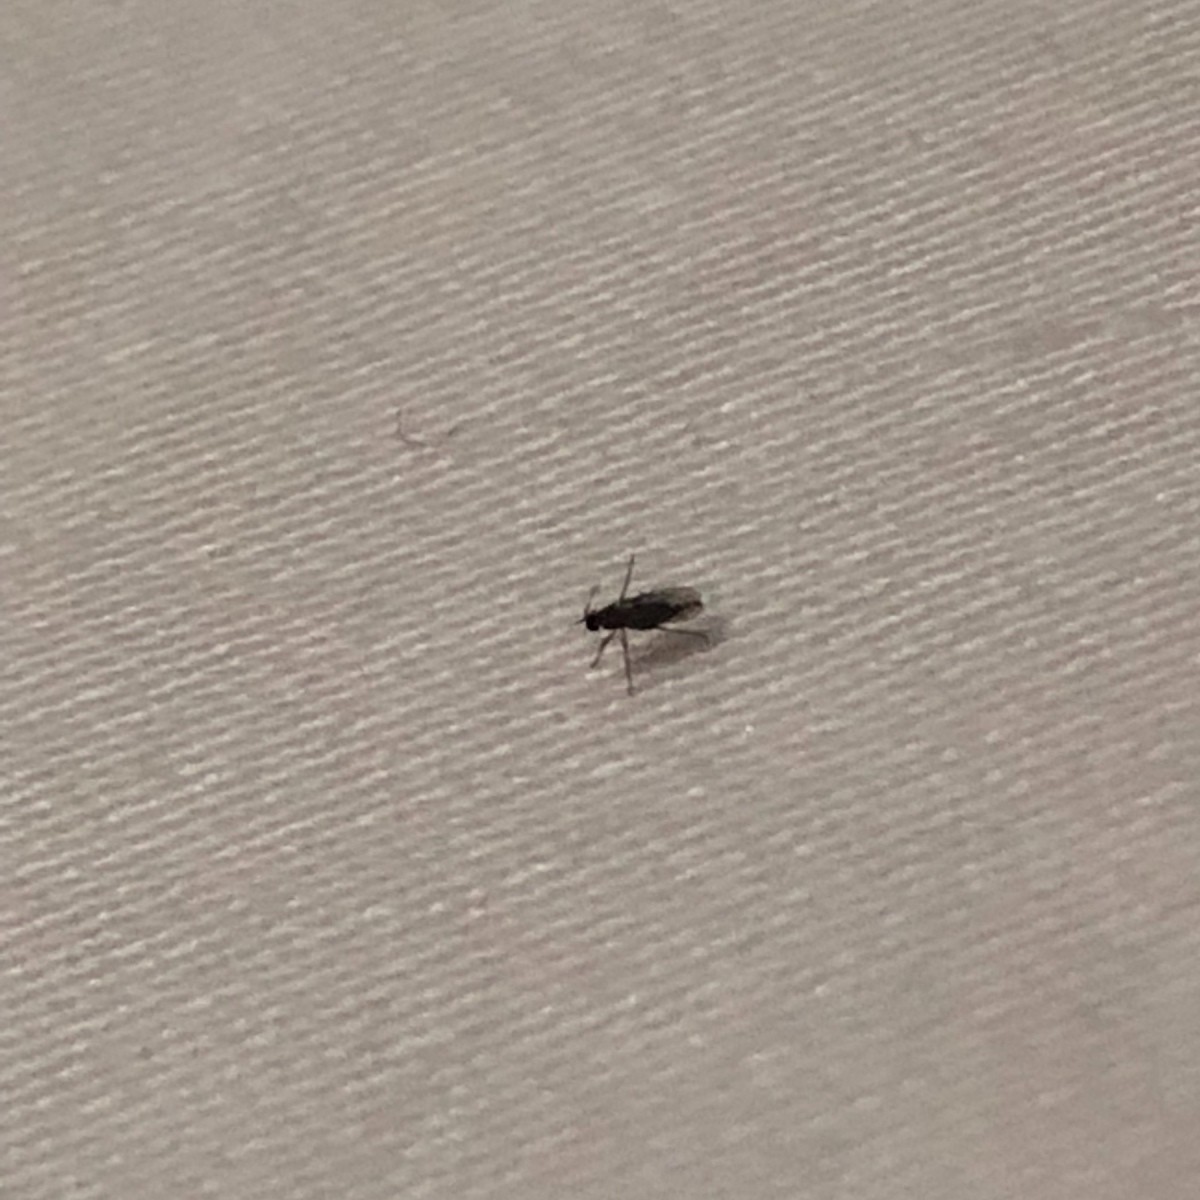 Identifying Tiny Flying Black Insects Tx3 